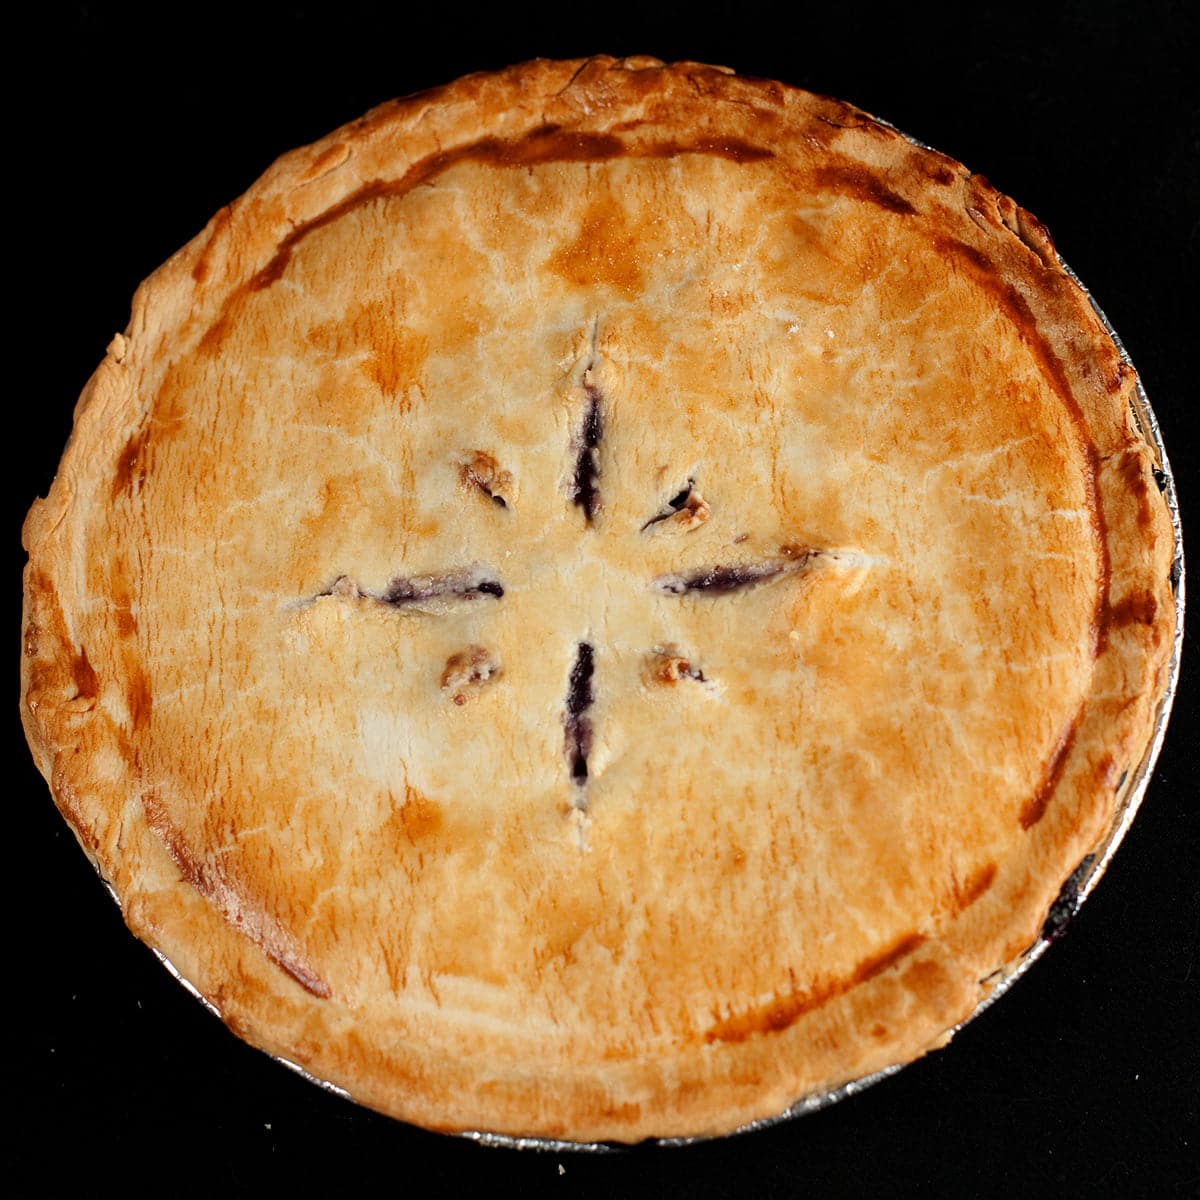 A whole 2-crust pie, against a black background.  Slits cut into the top crust reveal it to be a blueberry pie.